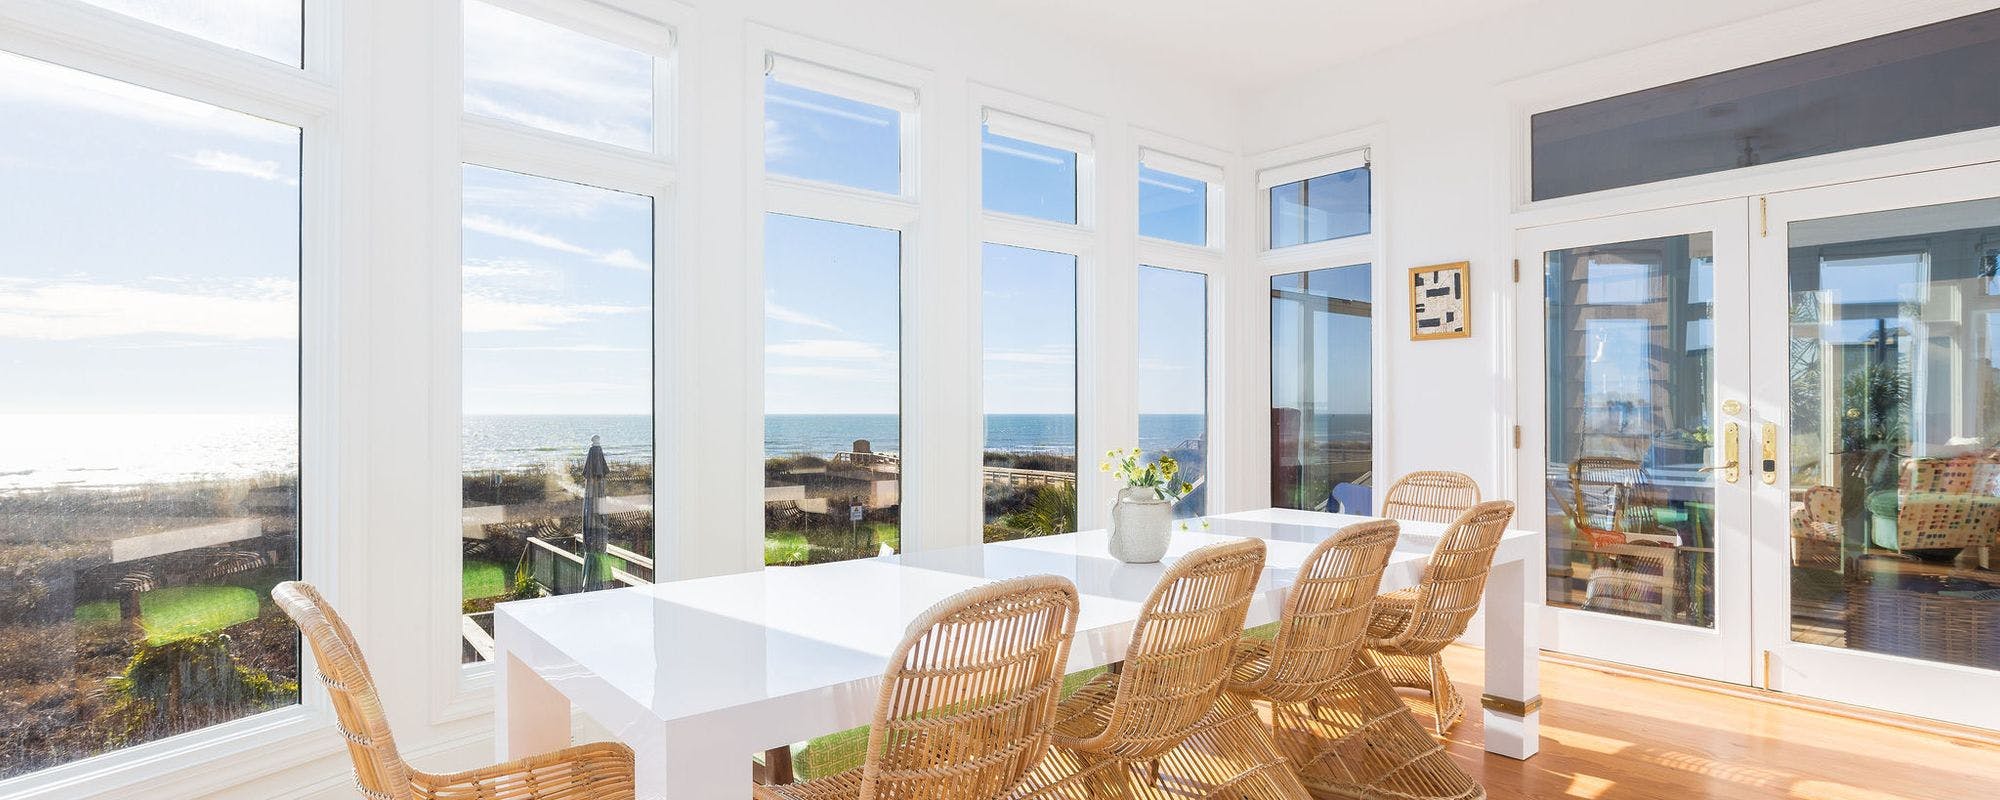 Oceanfront dining room with spectacular views in a Folly Beach vacation rental home.